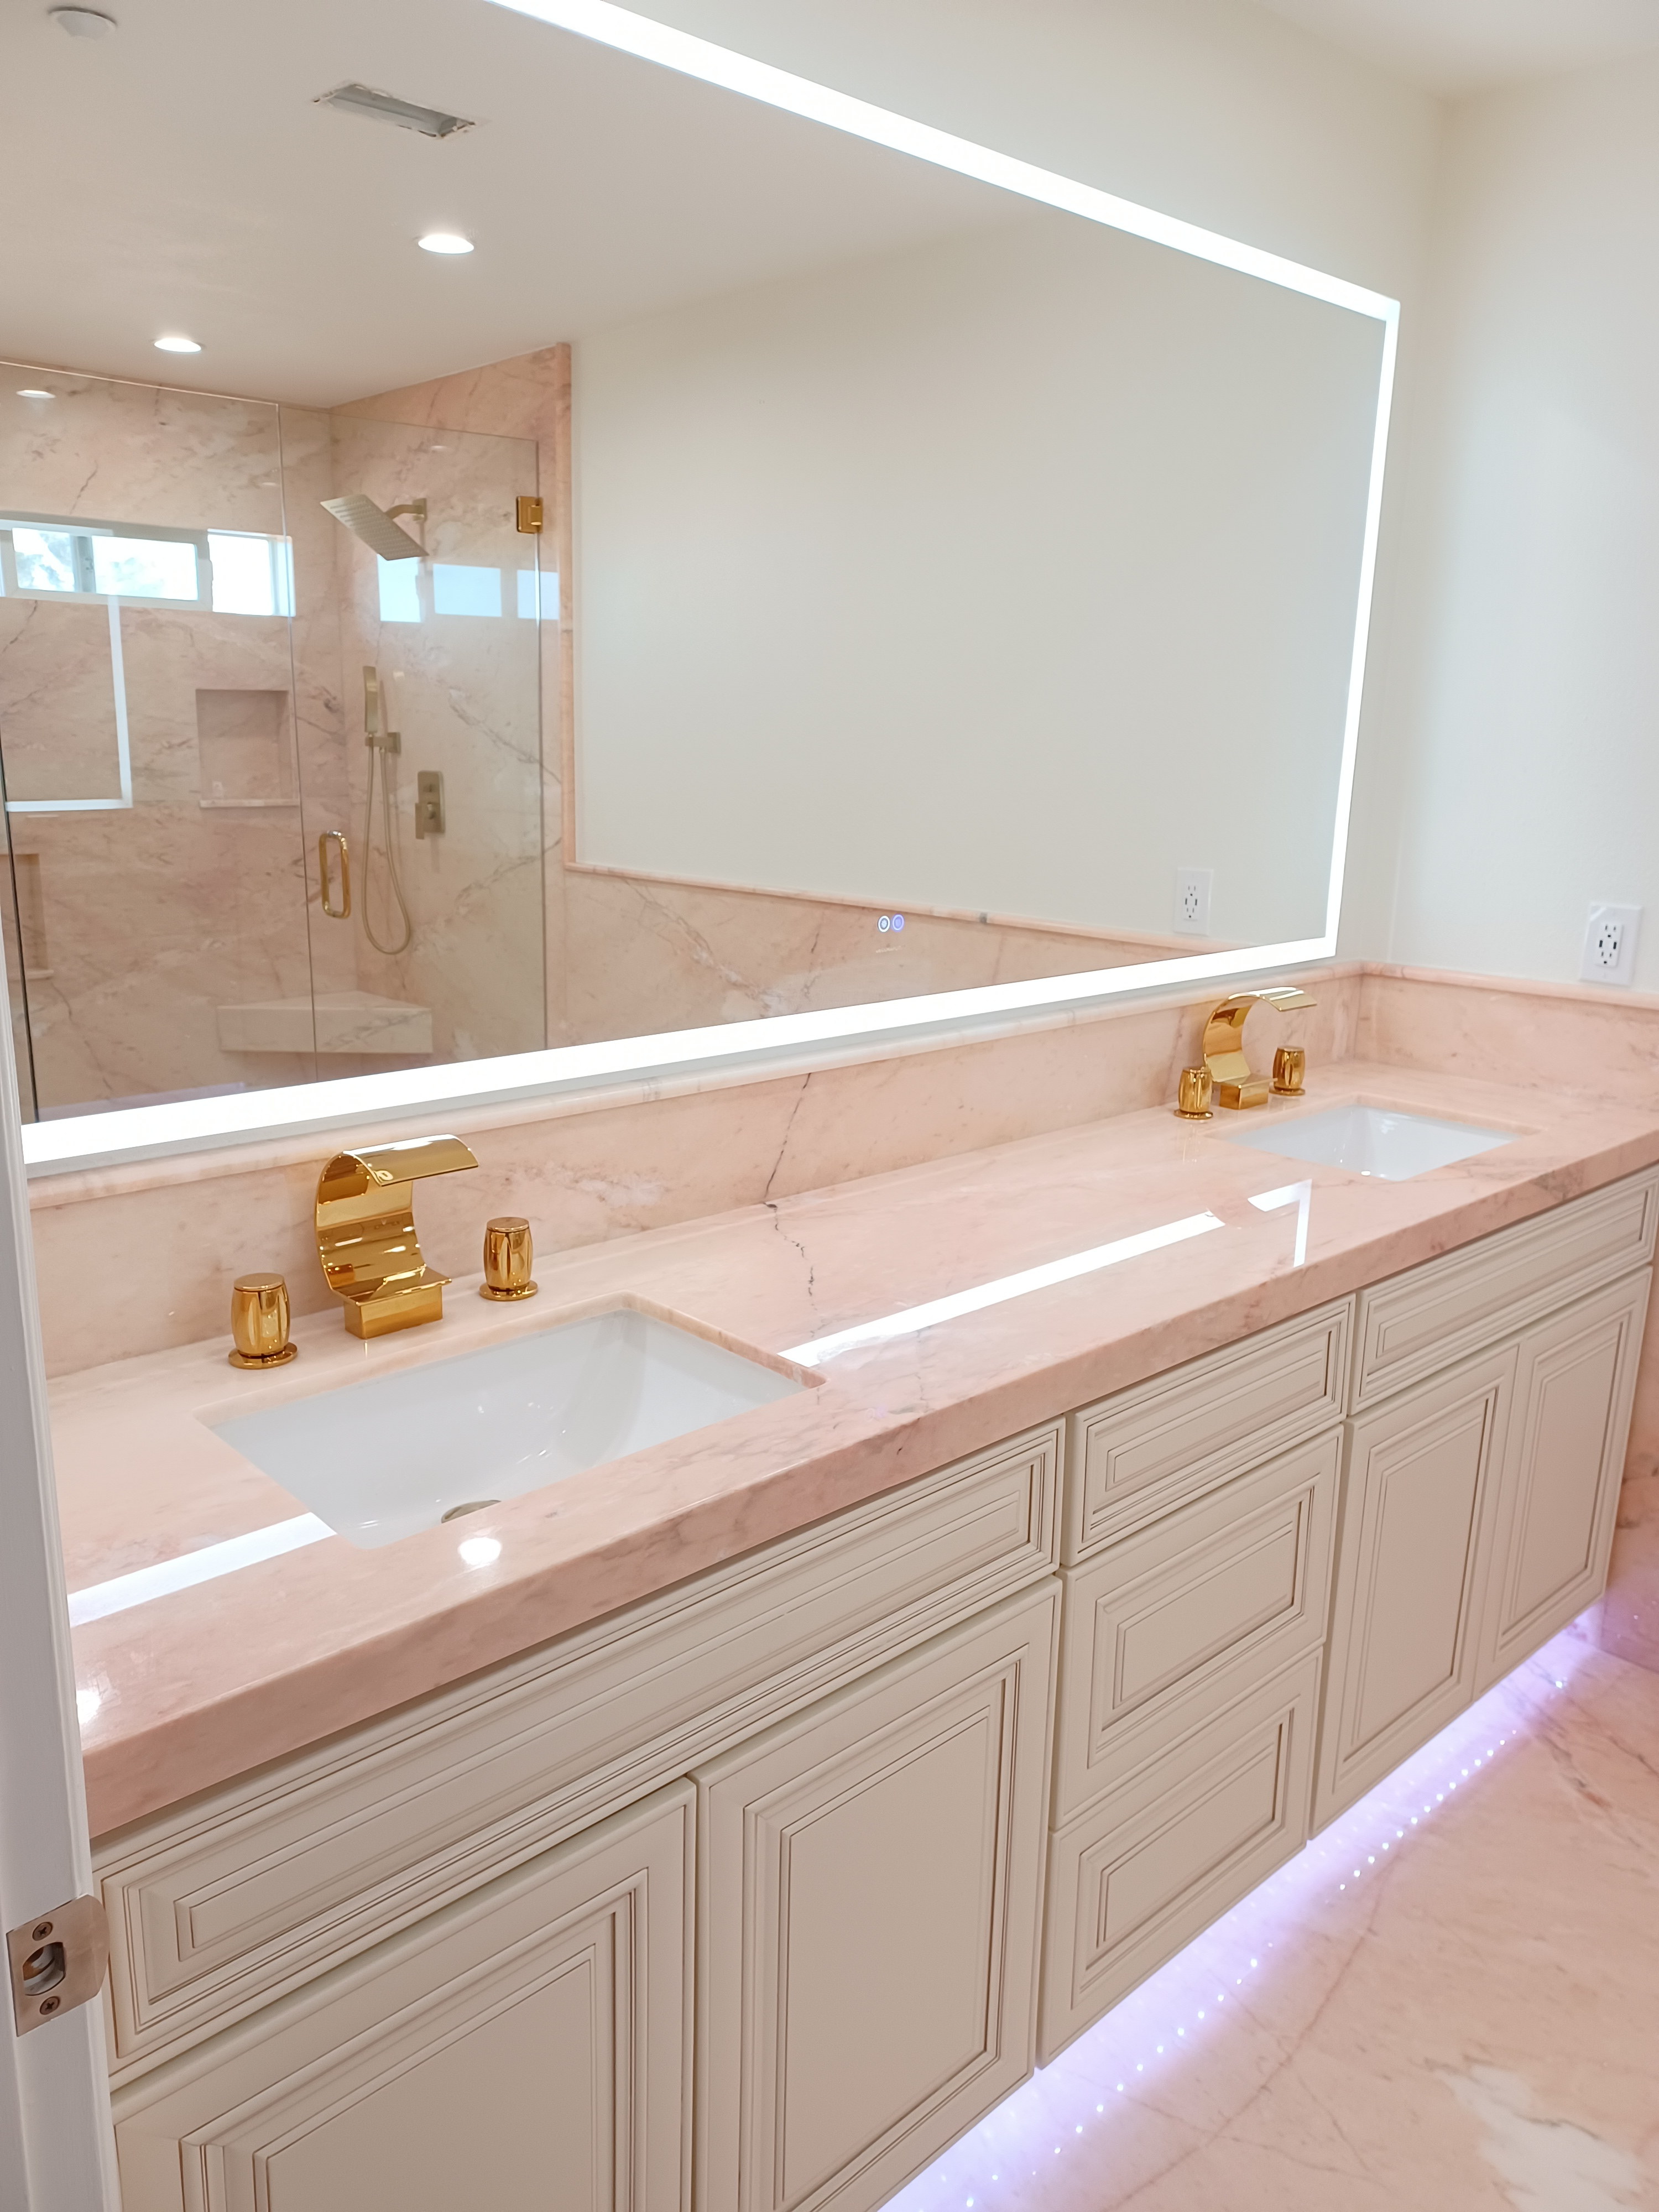 A bathroom with two sinks and a large mirror.